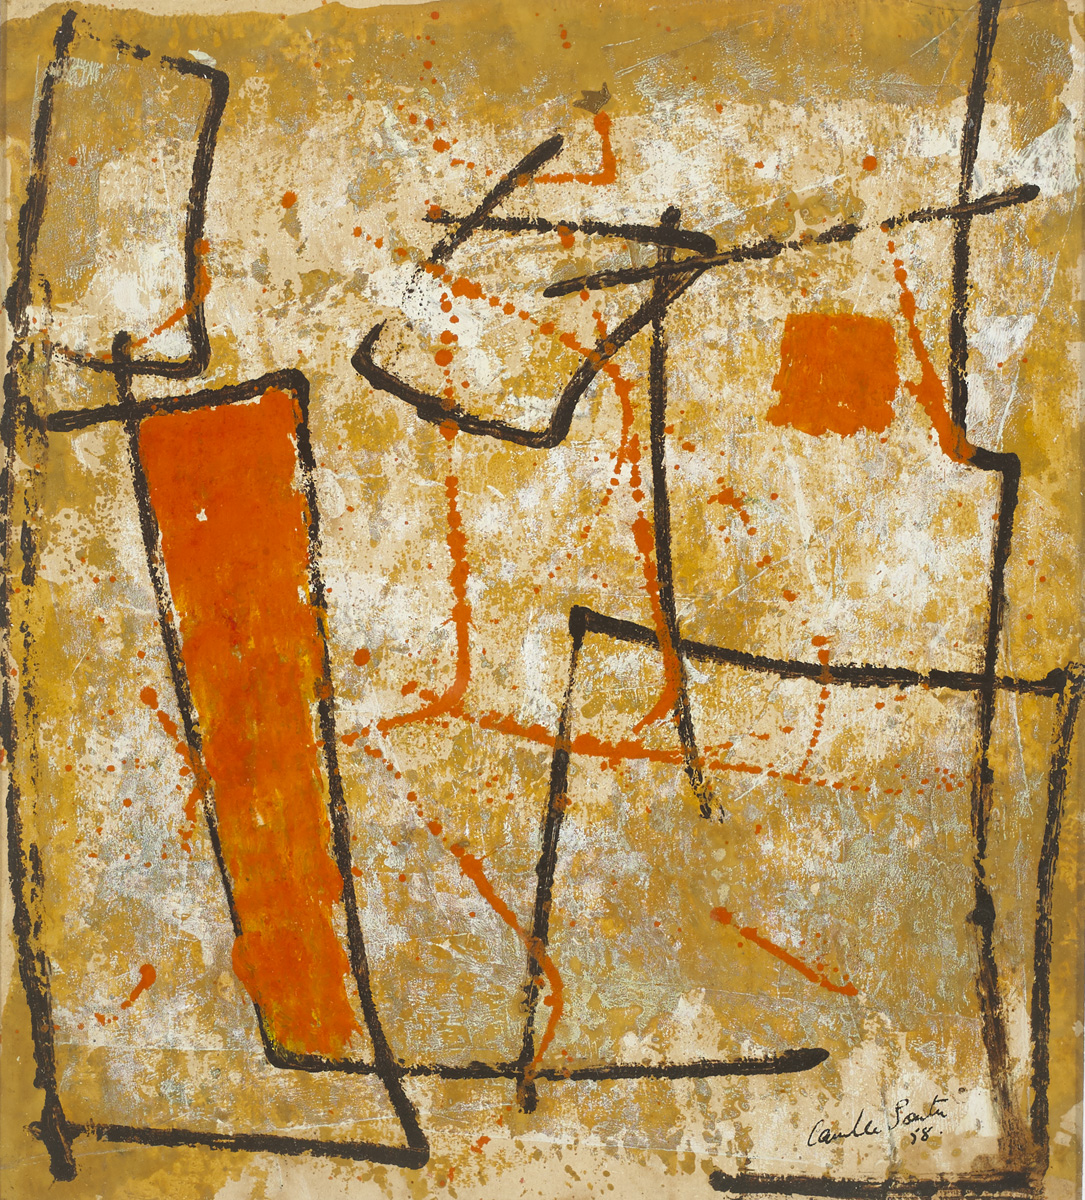 UNTITLED, 1958 by Camille Souter HRHA (b.1929) HRHA (b.1929) at Whyte's Auctions